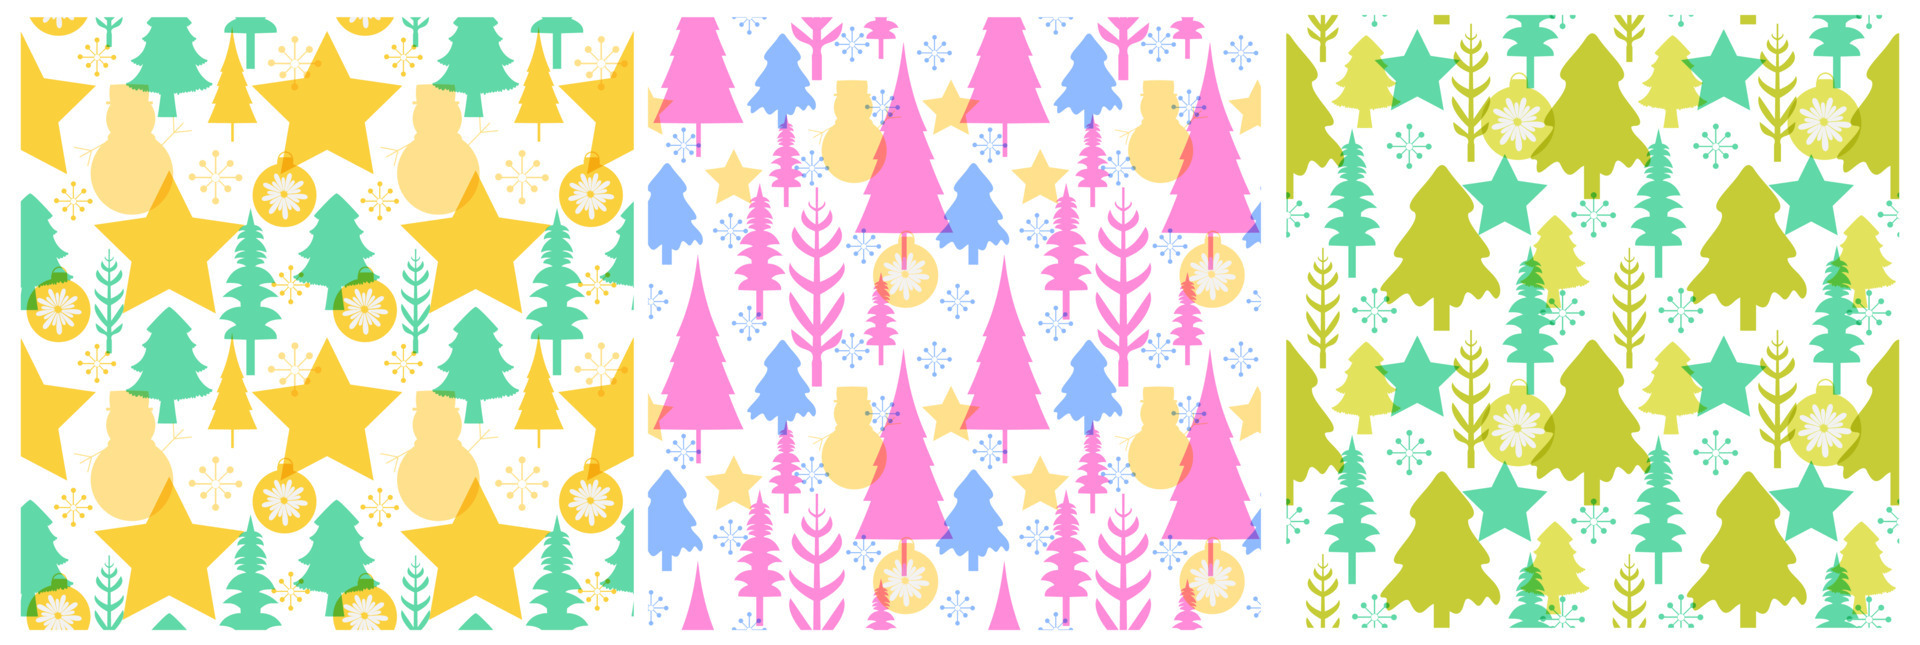 Set of Christmas Background Seamless Pattern Design With Santa Claus ...